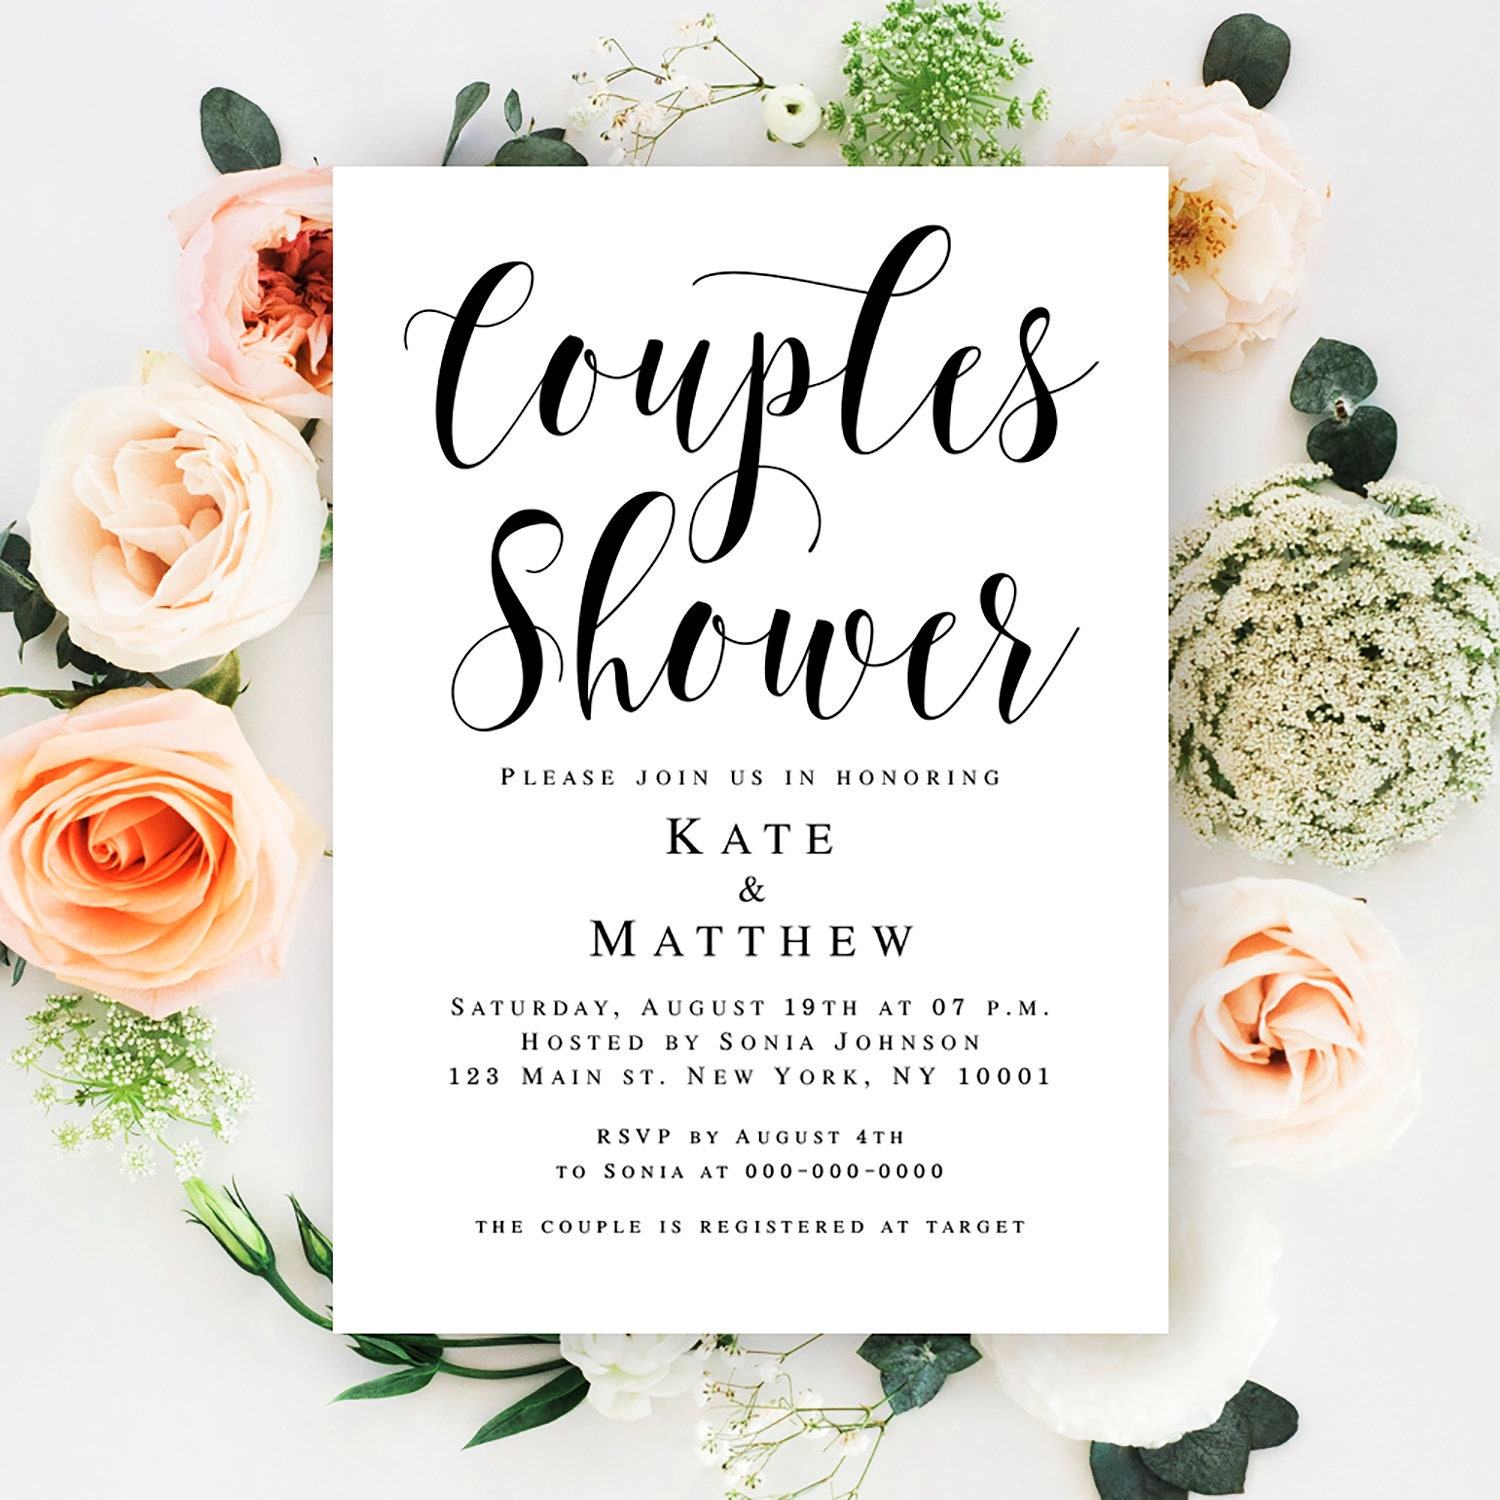 Couples Shower Invitations Template